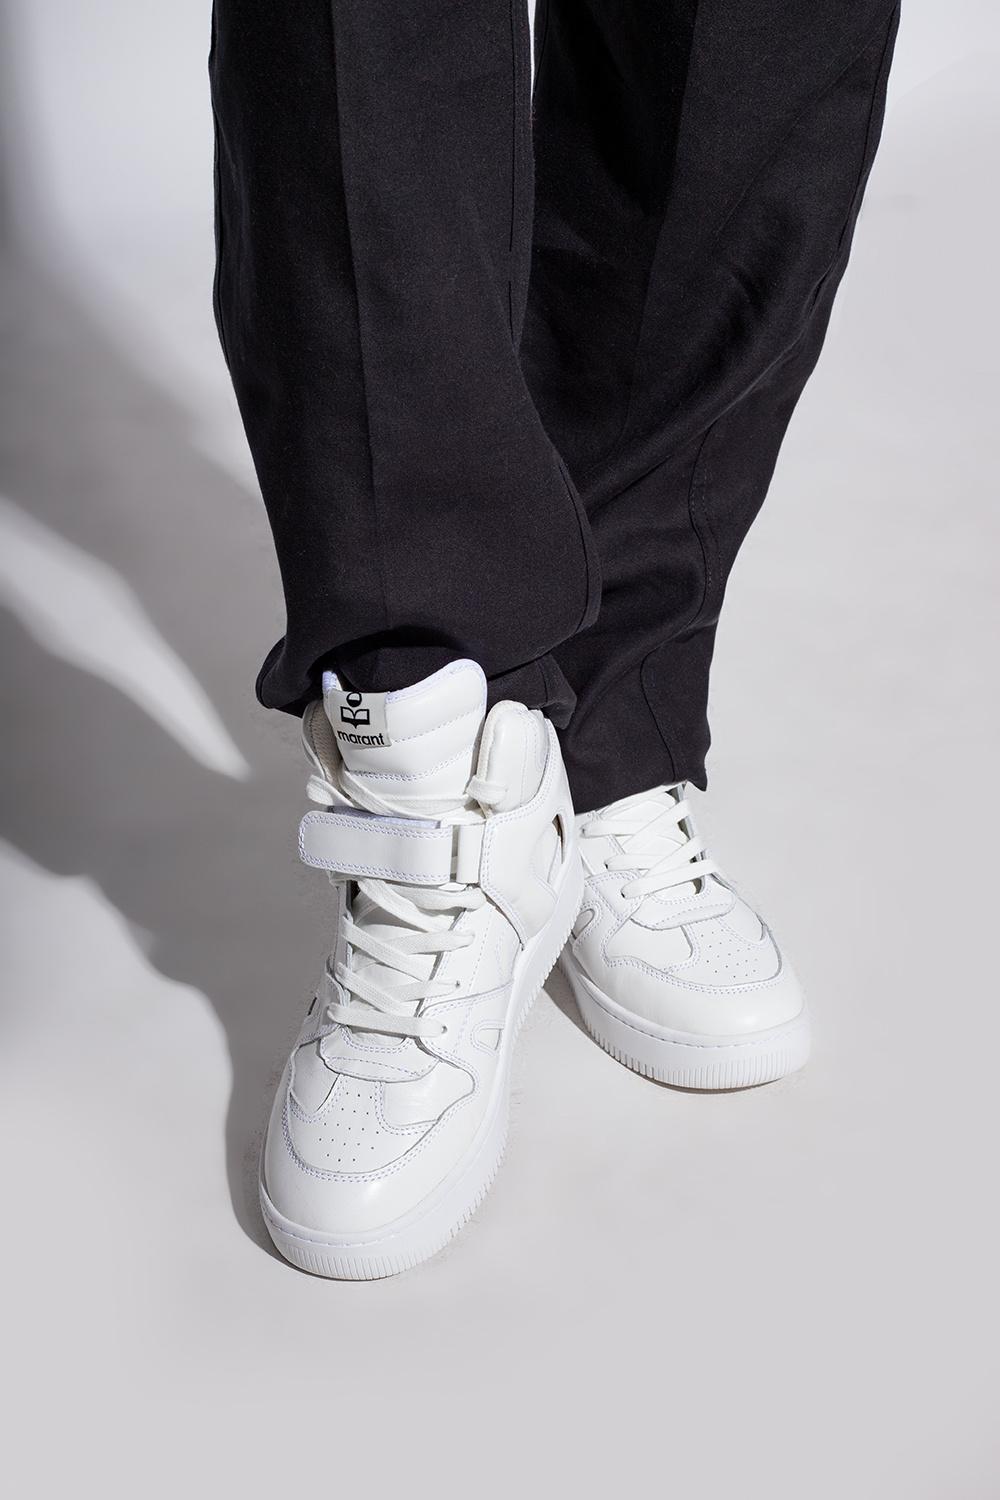 Isabel Marant 'brooklee' High-top Sneakers in White Lyst Canada